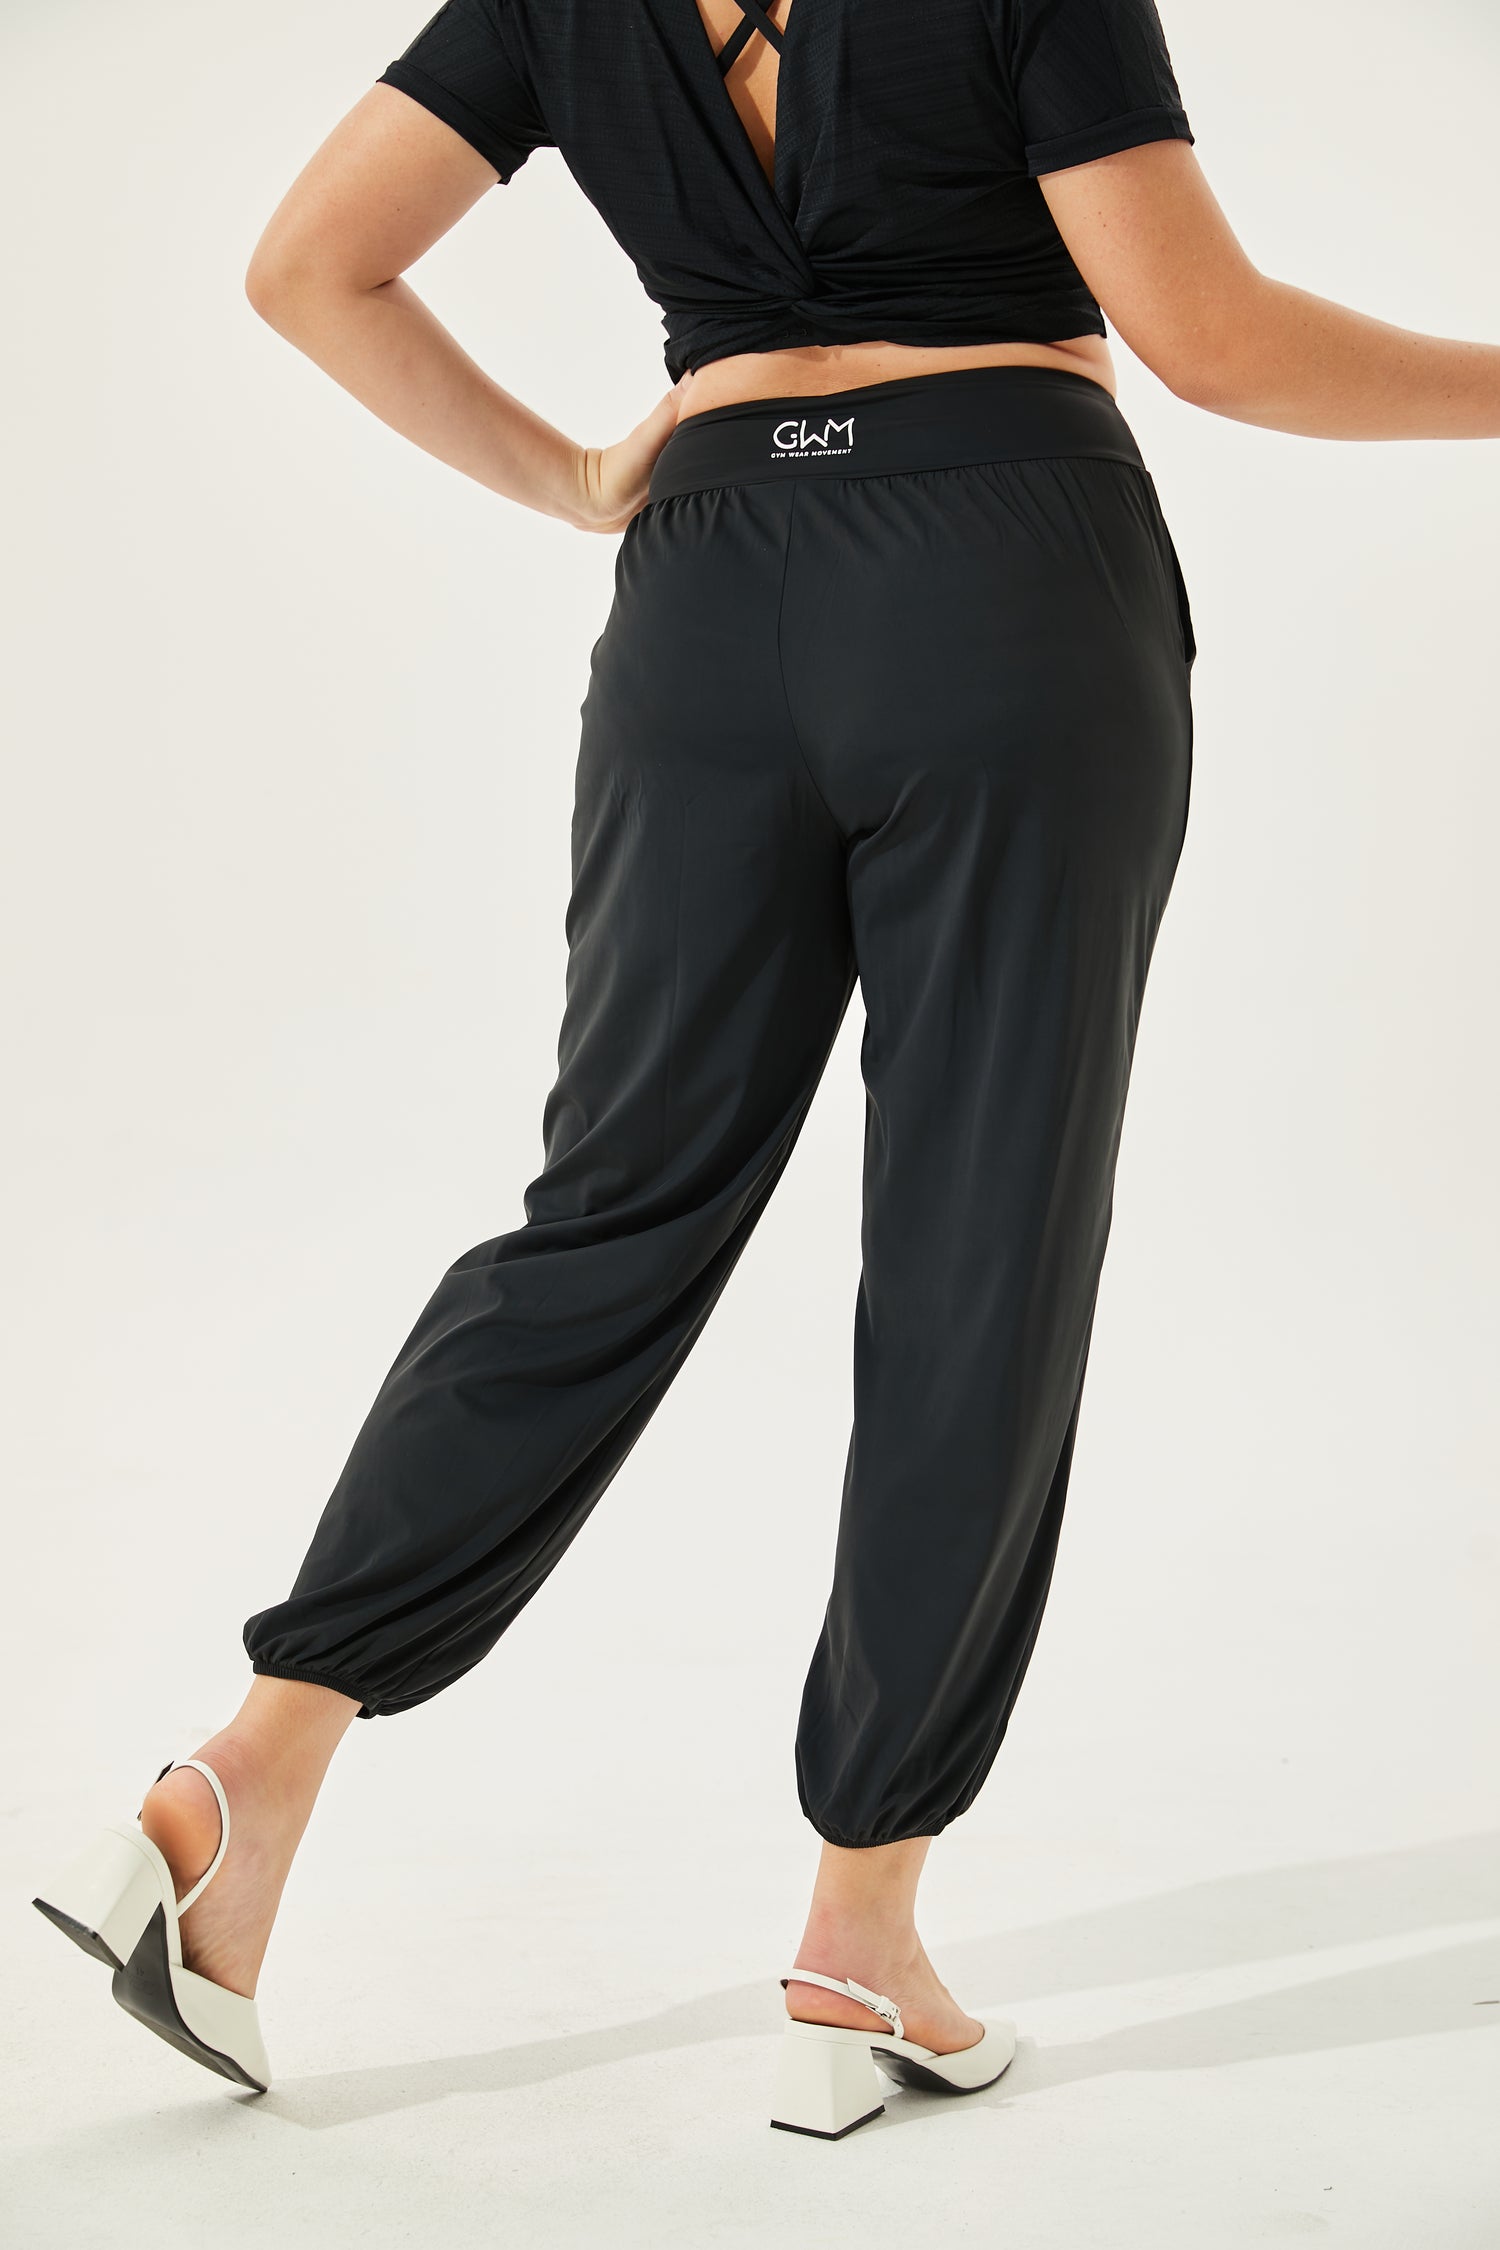 Best travel joggers for women in Singapore, Malaysia, Australia